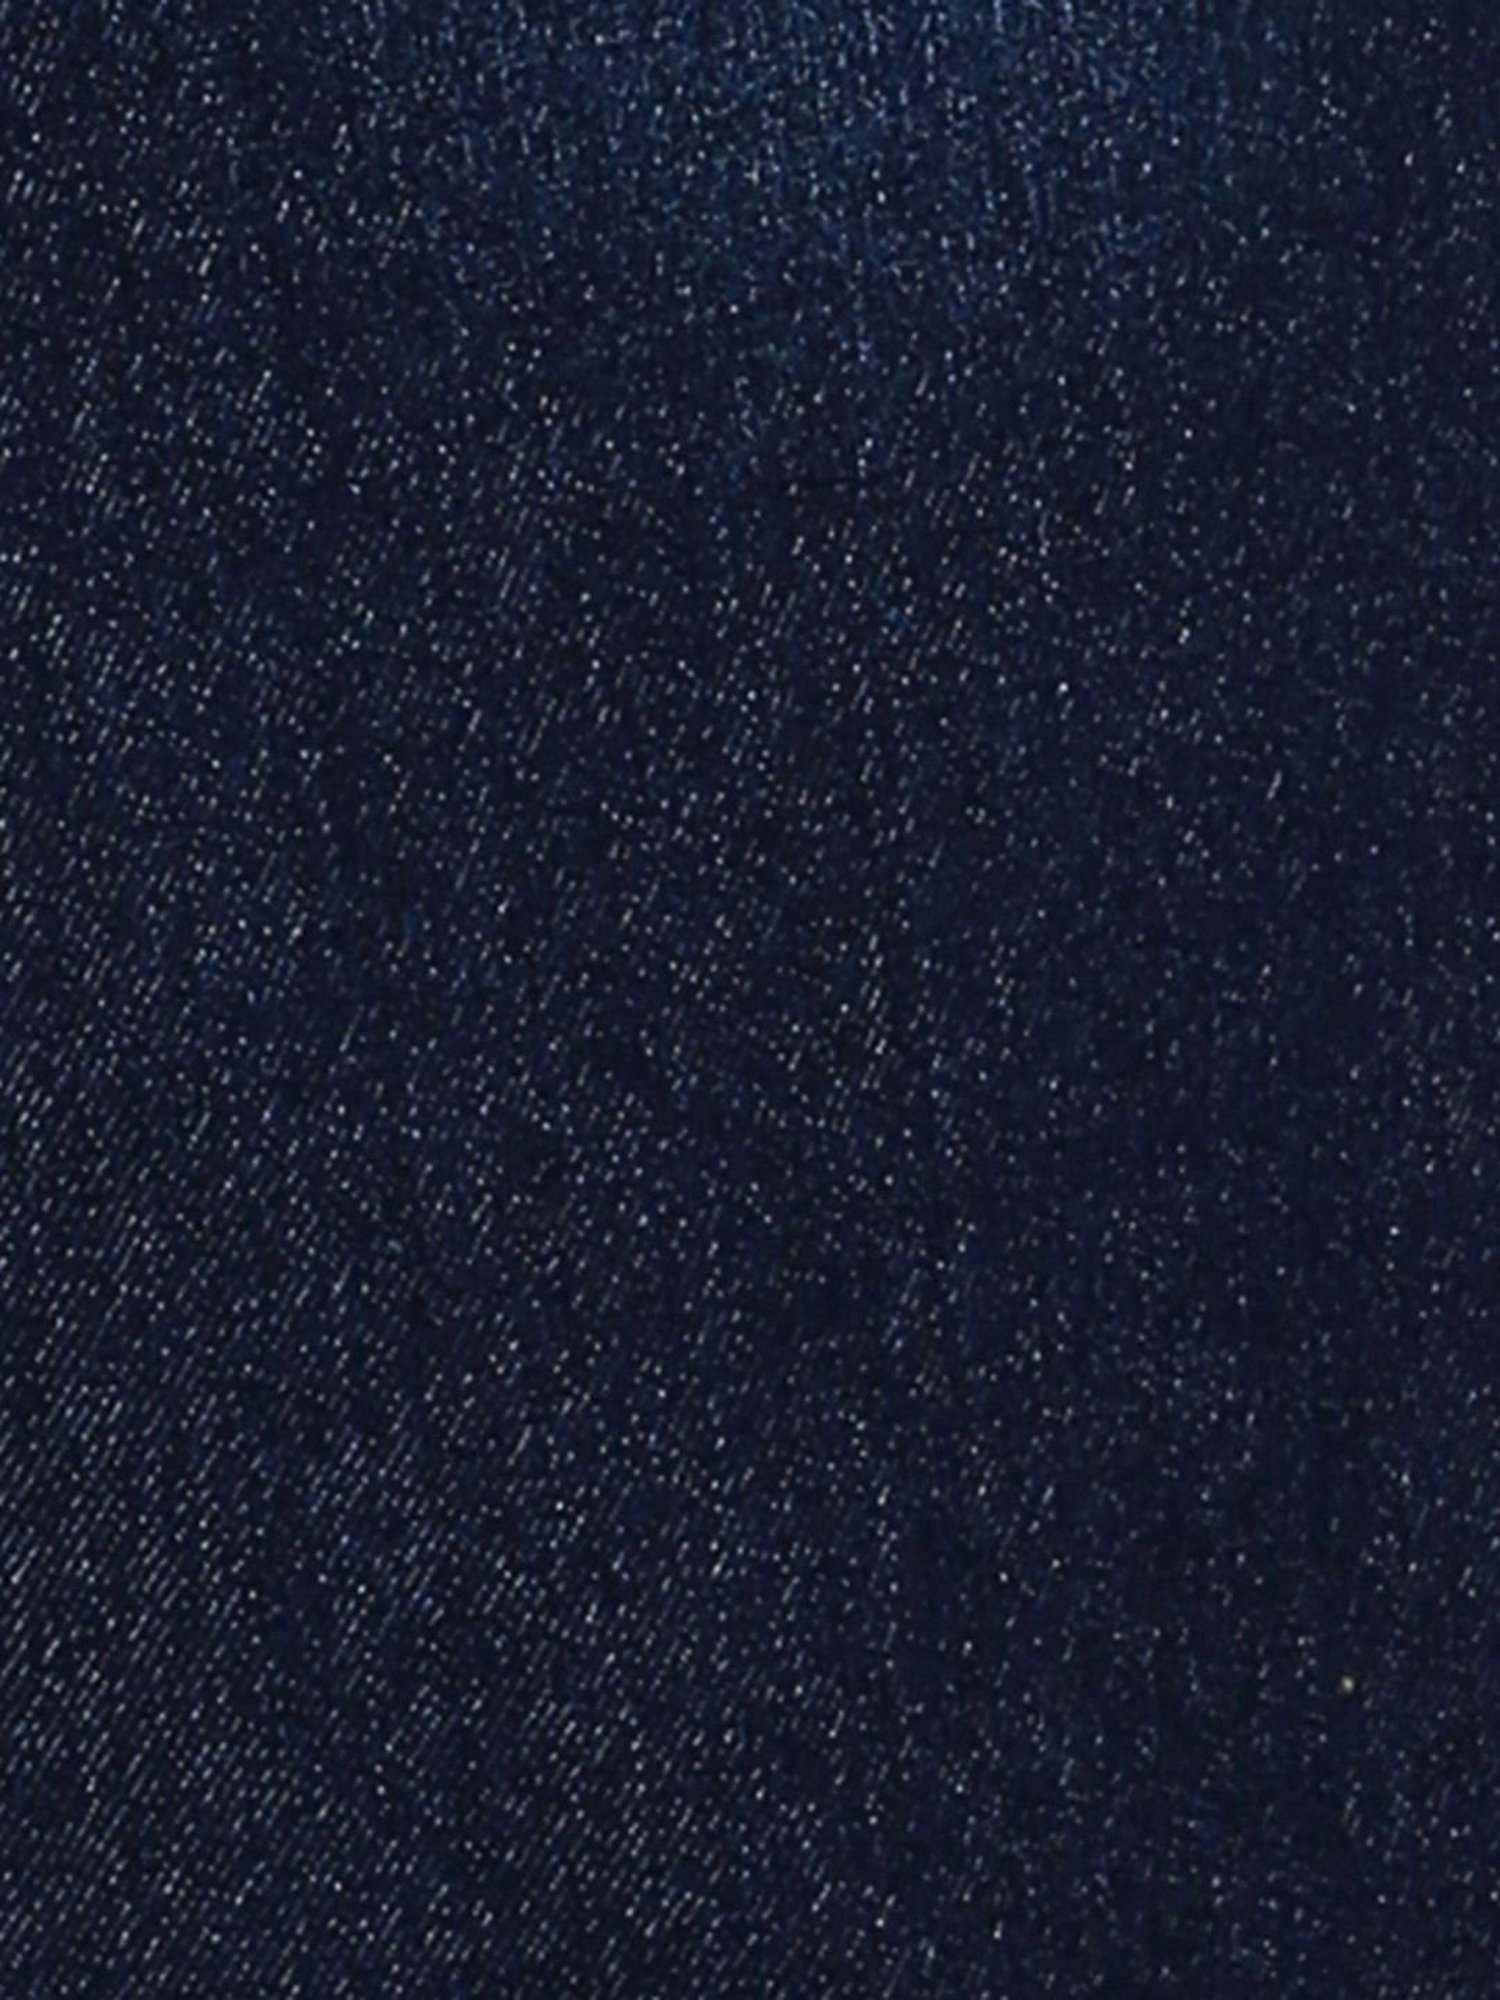 Sample Swatch for Sachi Midnight Blue Linen-Like Texture Fabric by Prestige